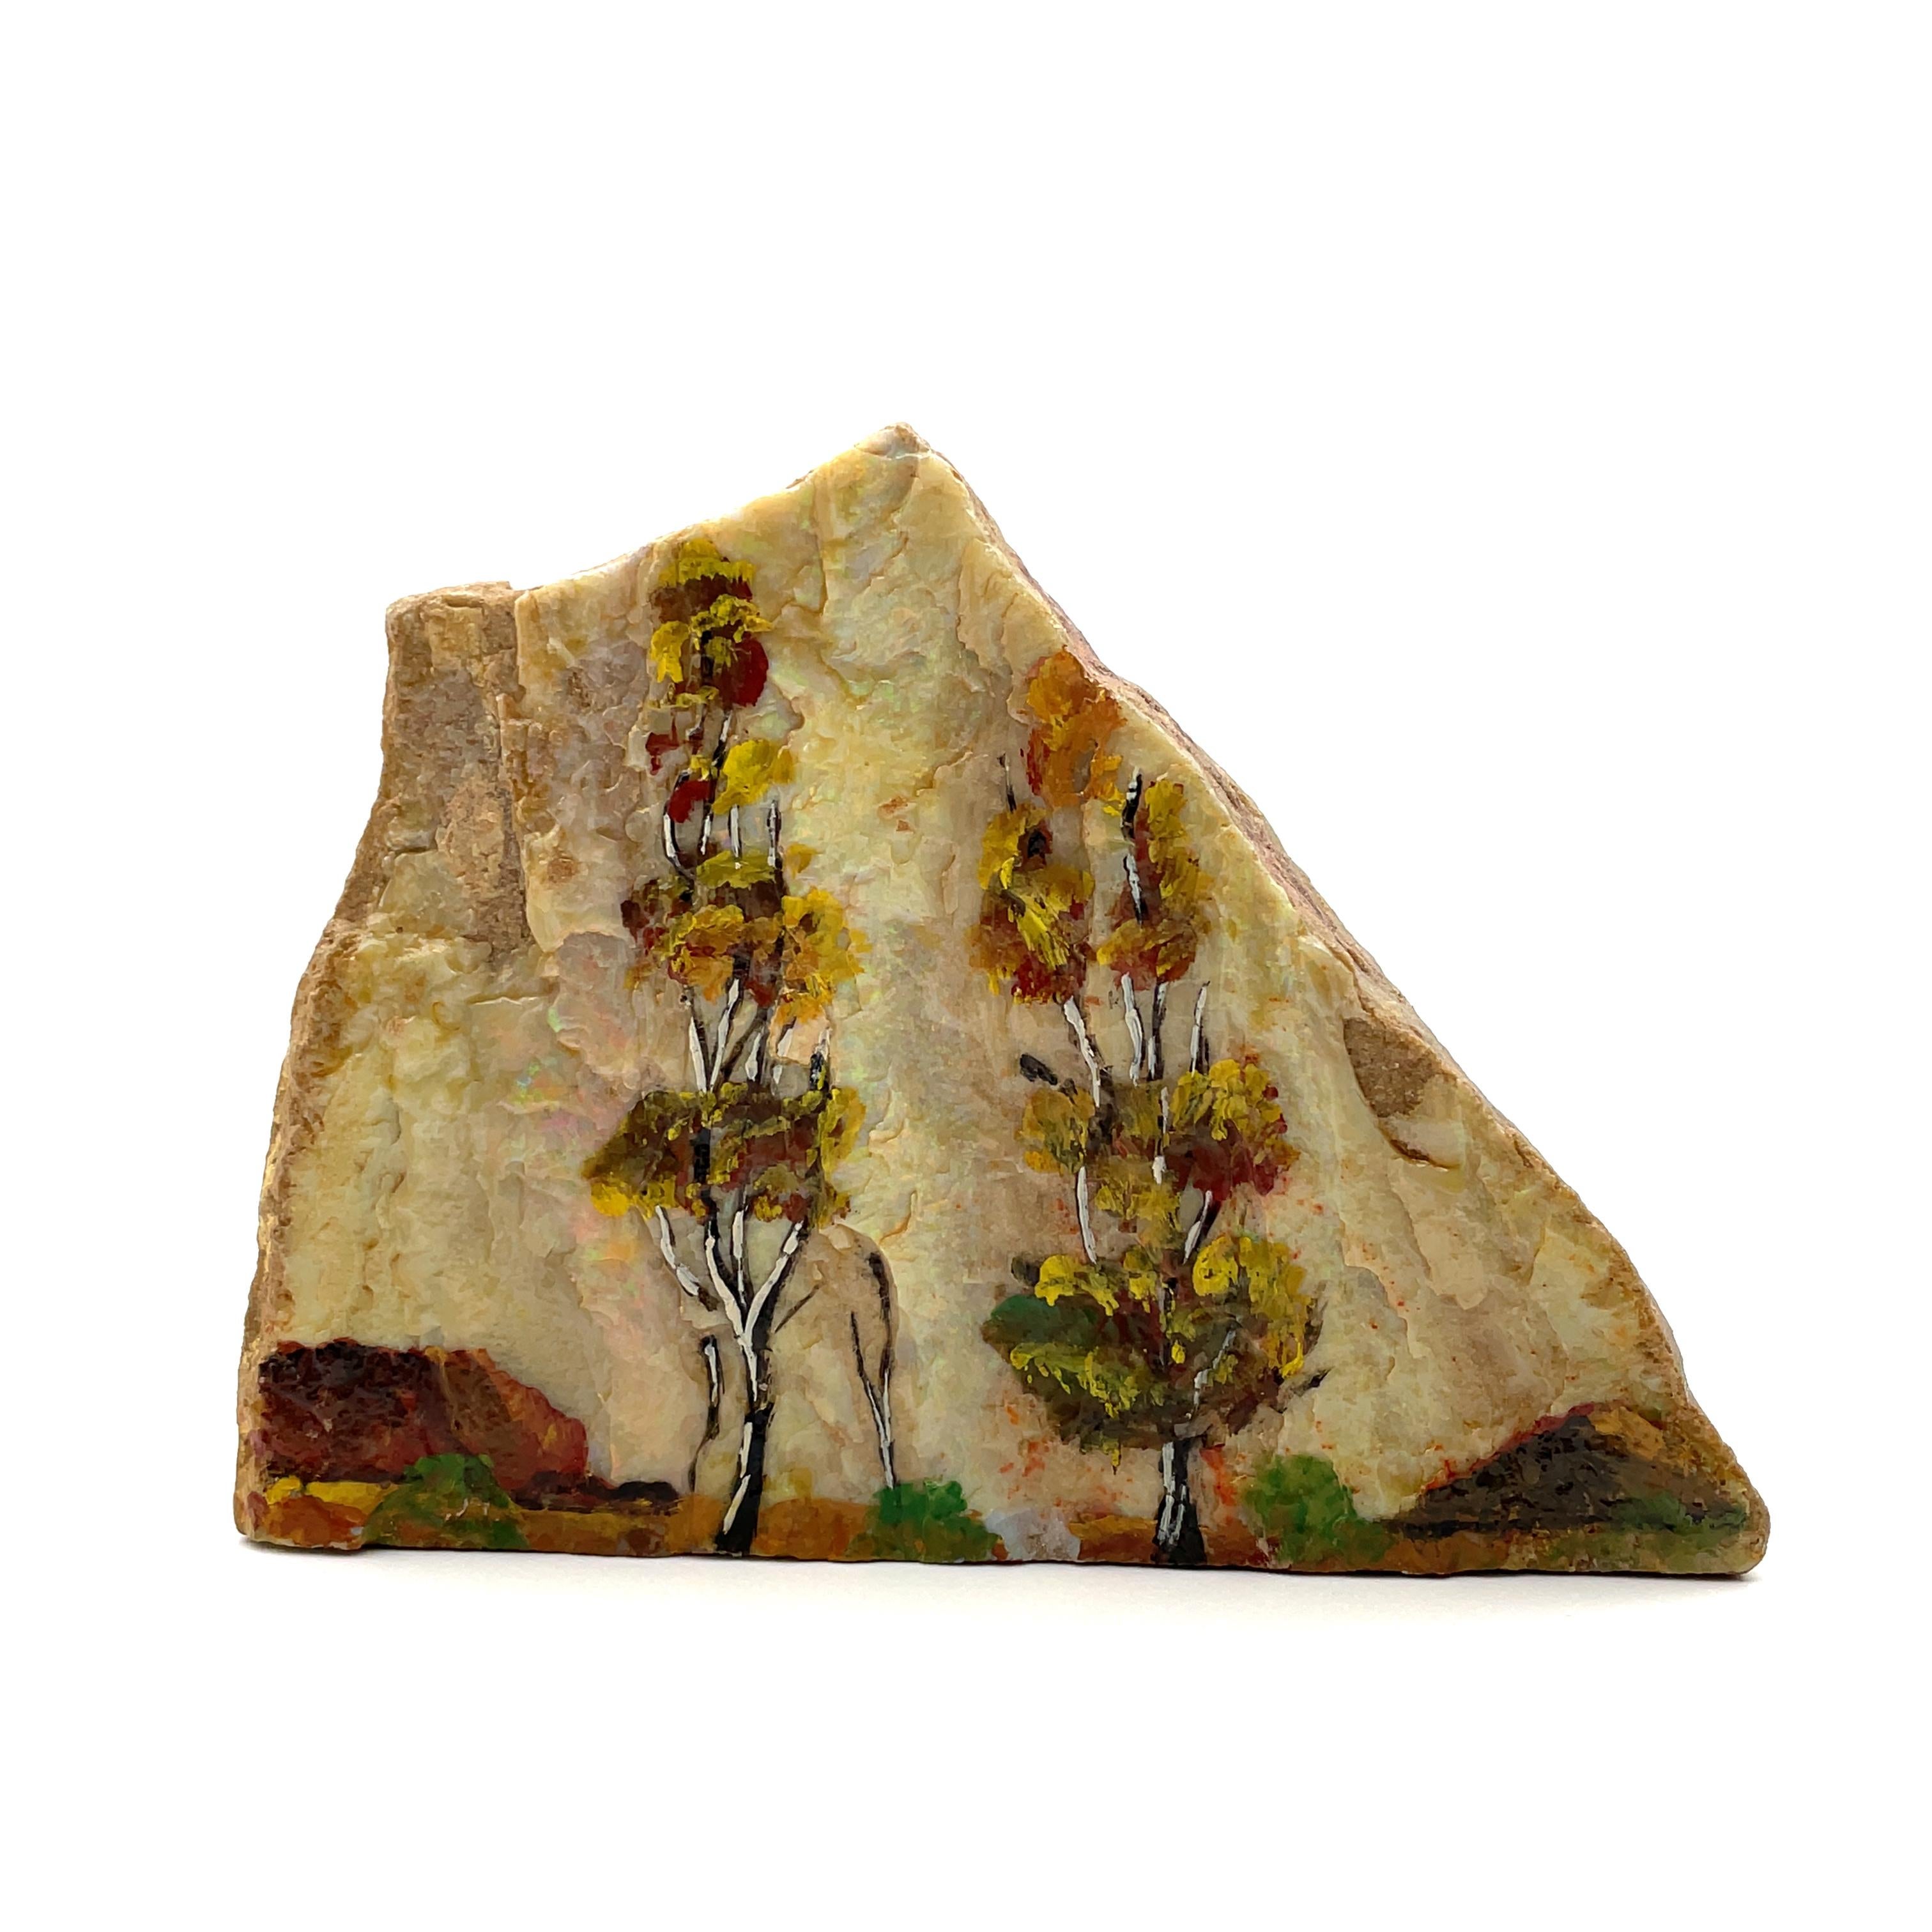 This objet d'art is perfect for someone who loves both gemstones and art! A beautiful nature scene has been hand-painted on this large piece of natural Australian opal rough that displays a rainbow of colors in different light sources. Reds,